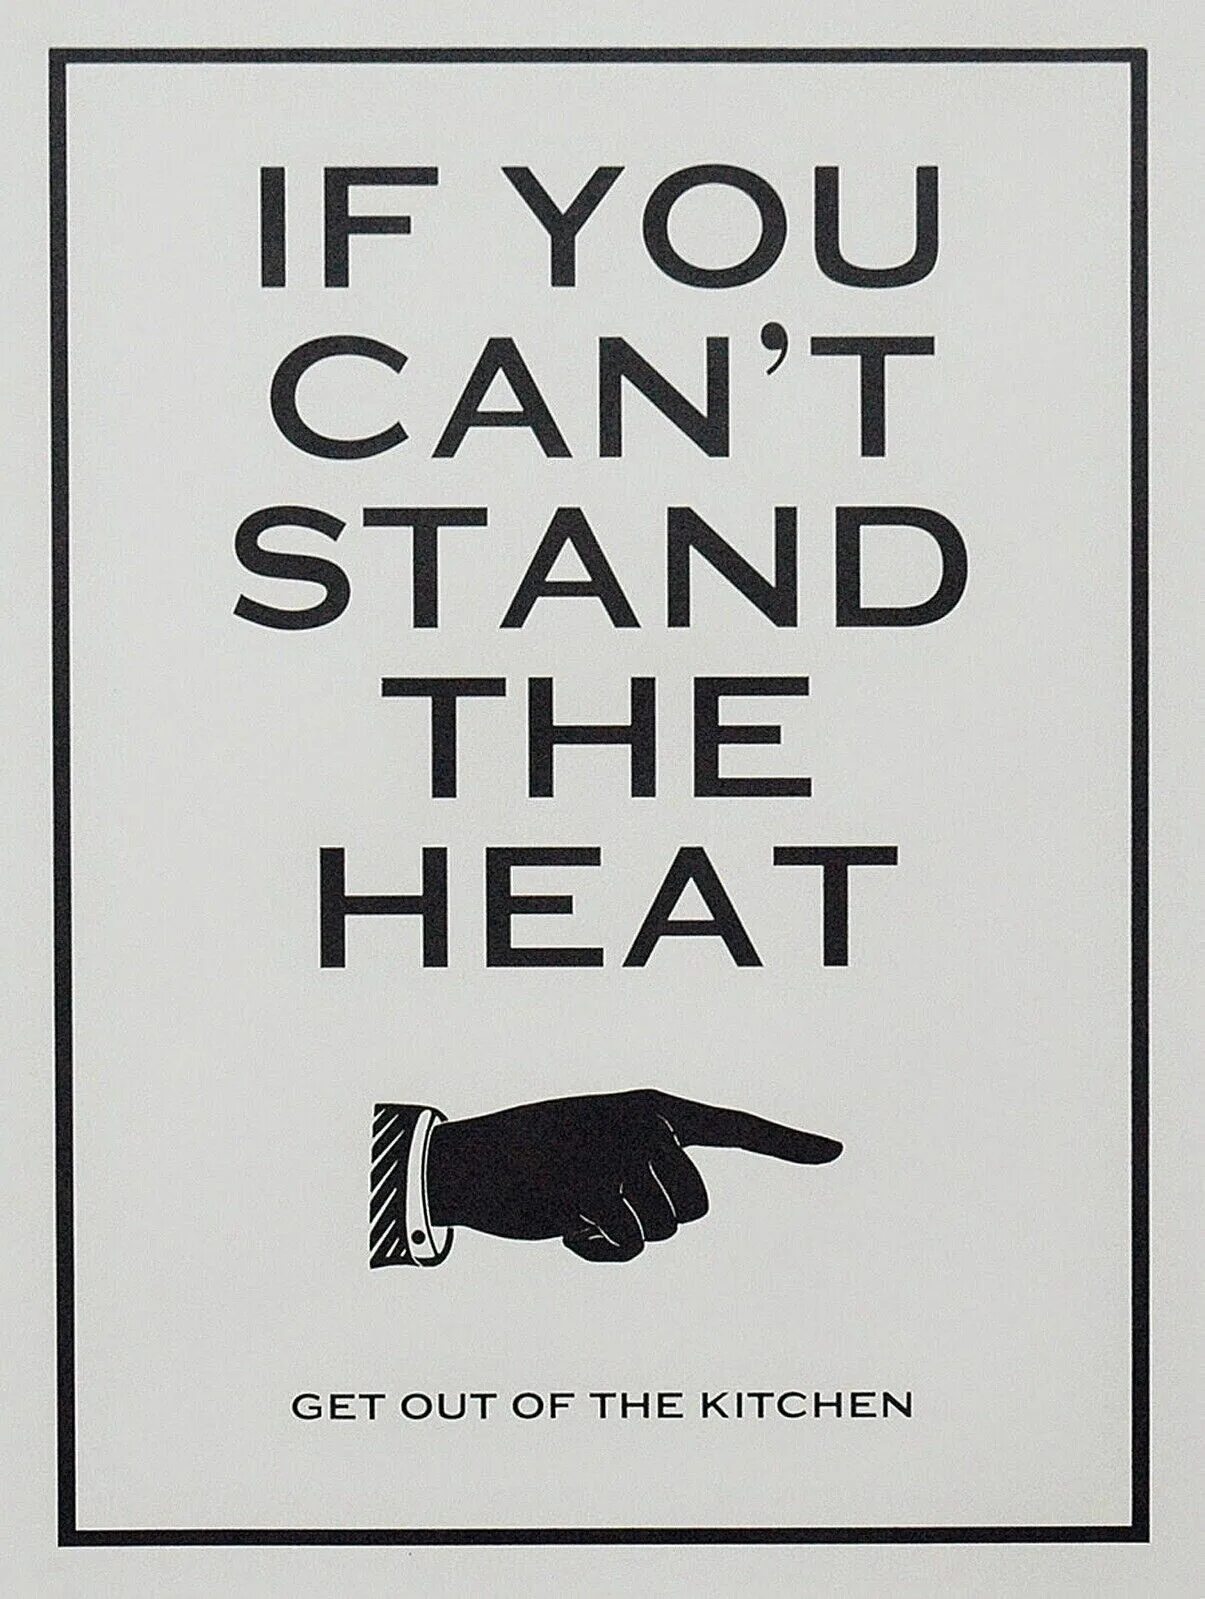 Stay stood stood. Get out of Kitchen. If you can't Stand the Heat get out of the Kitchen. Heat перевод. Can't Stand.